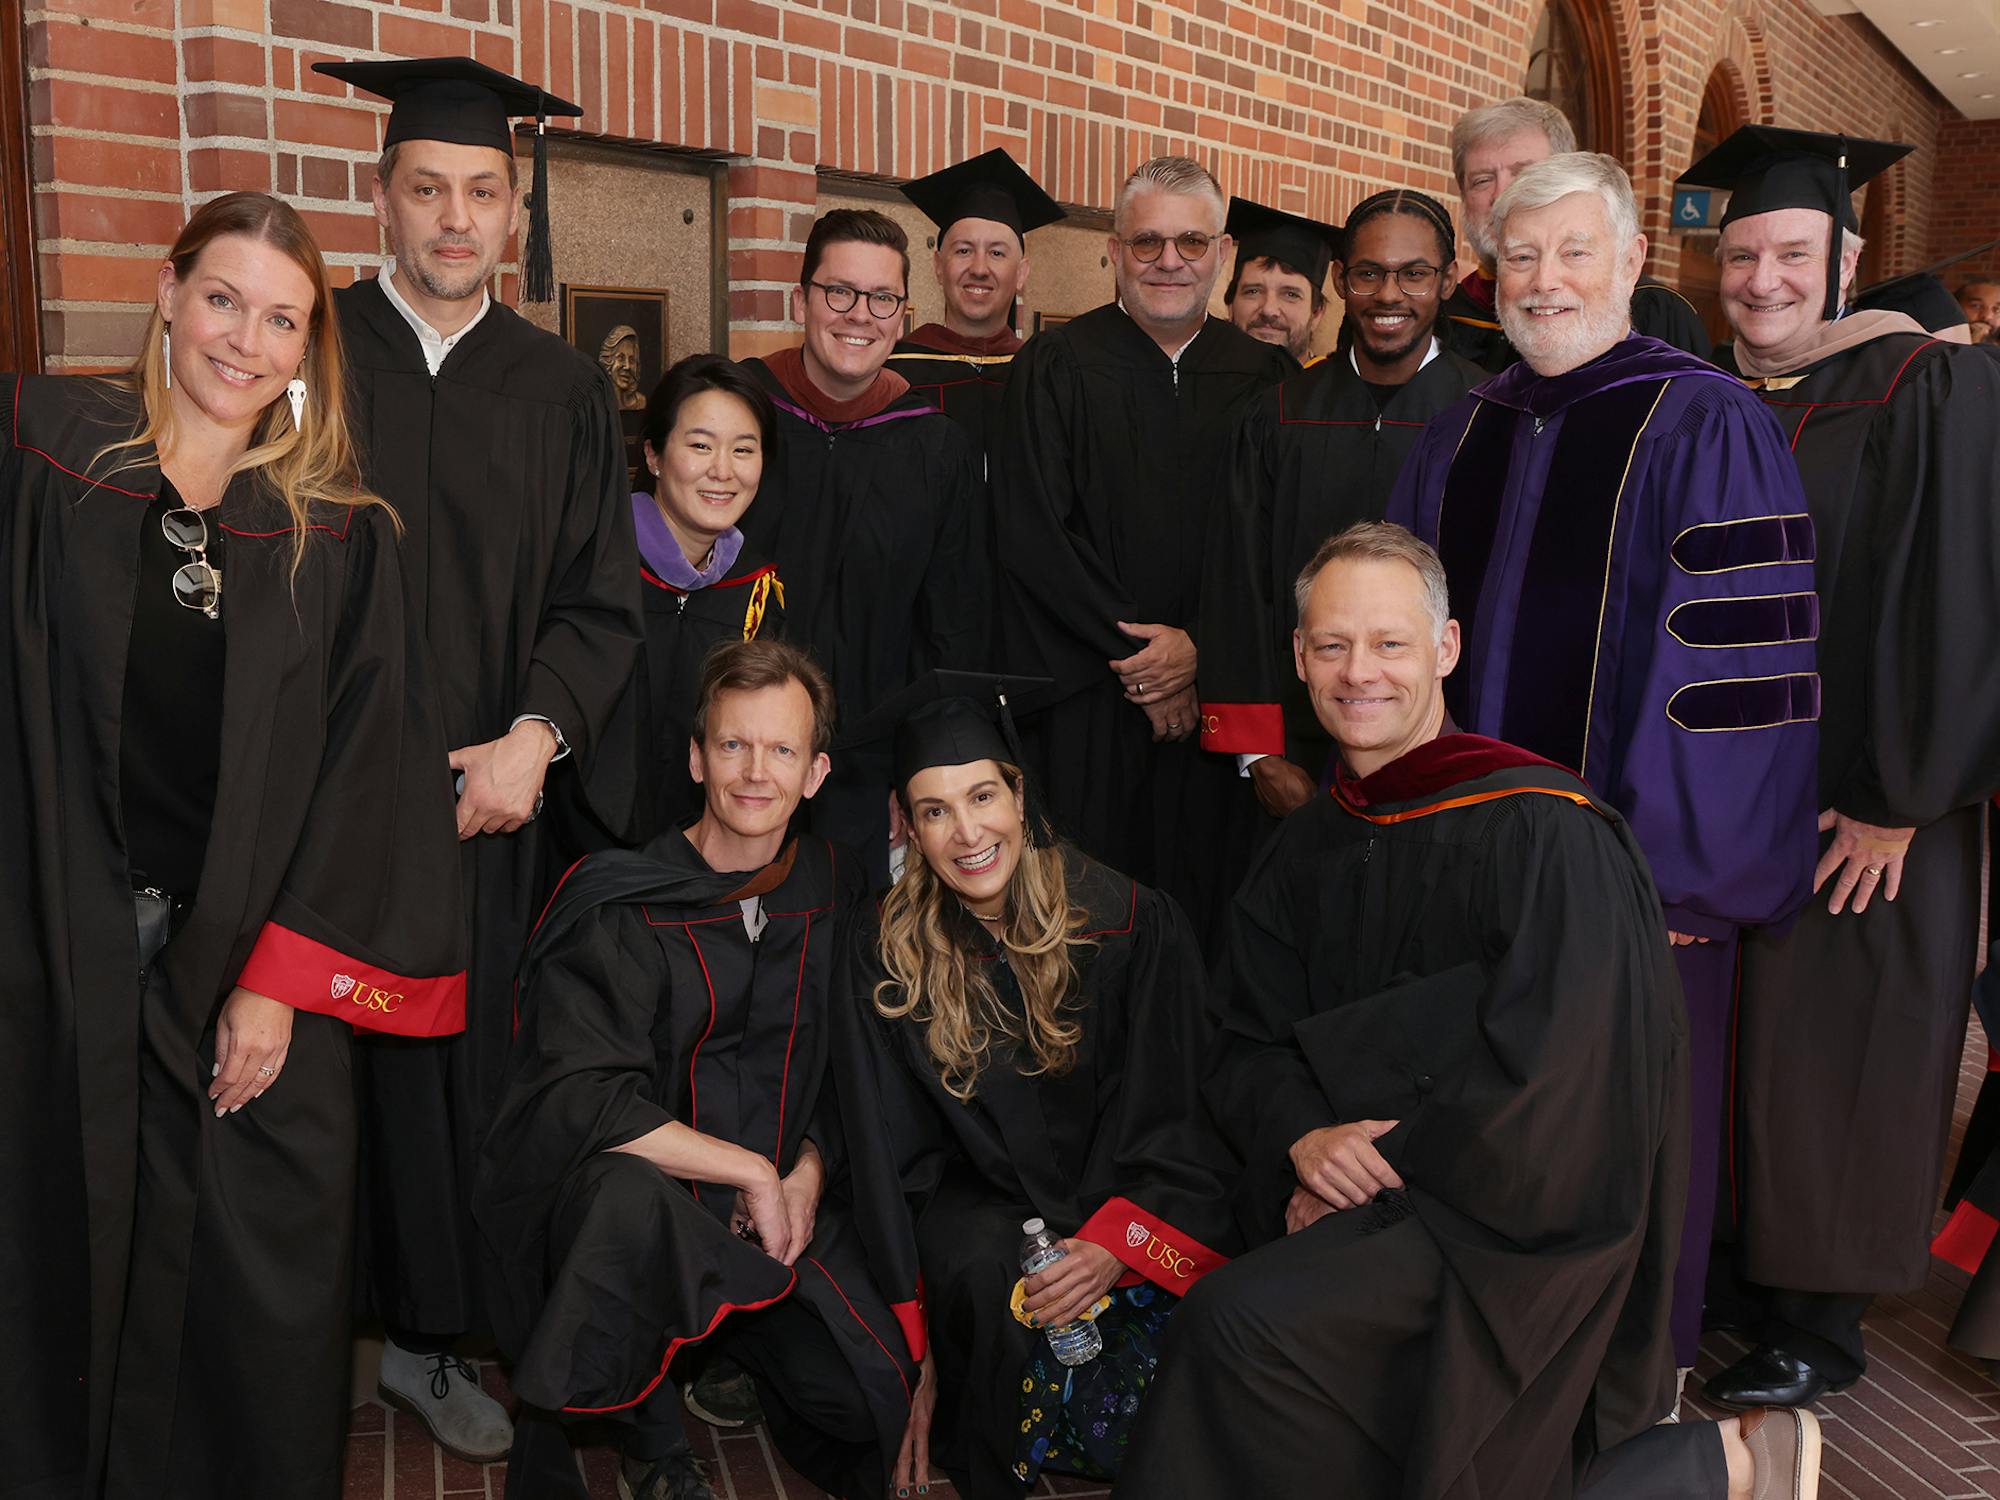 Faculty in gowns